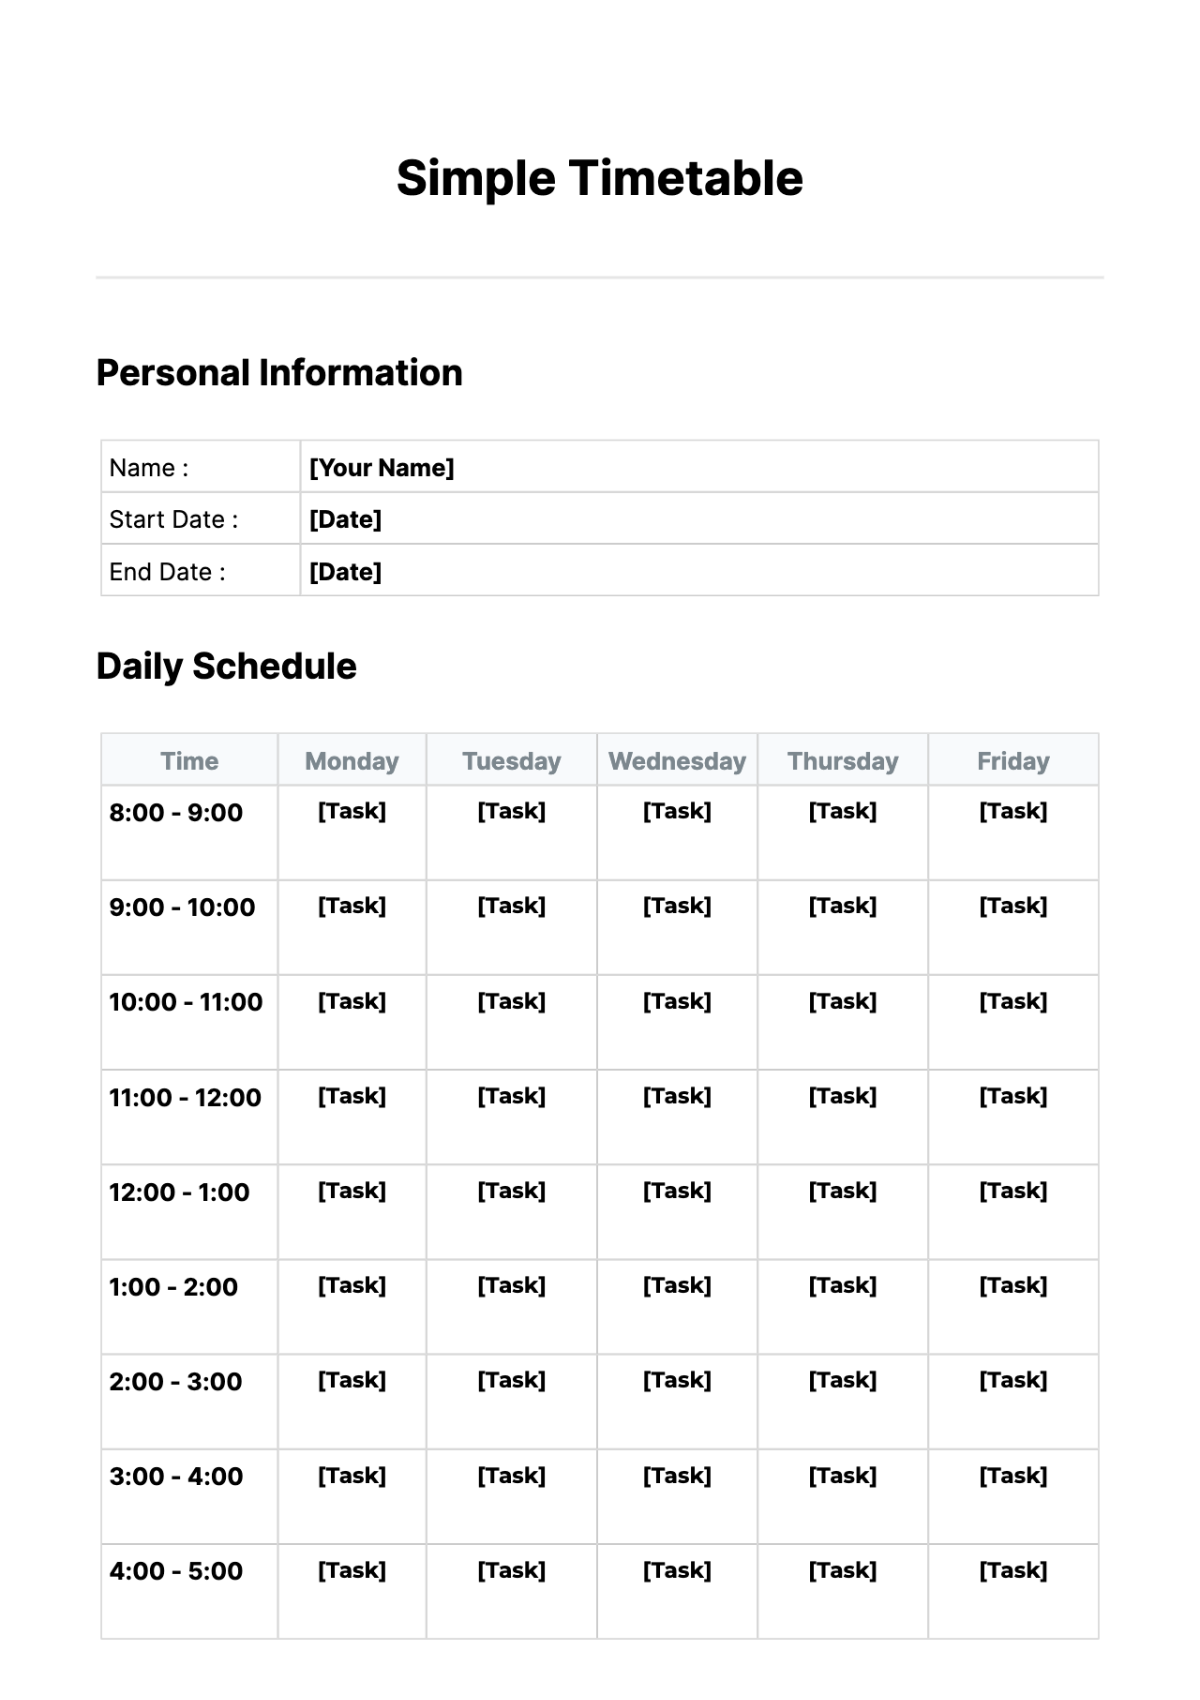 Simple Timetable Template